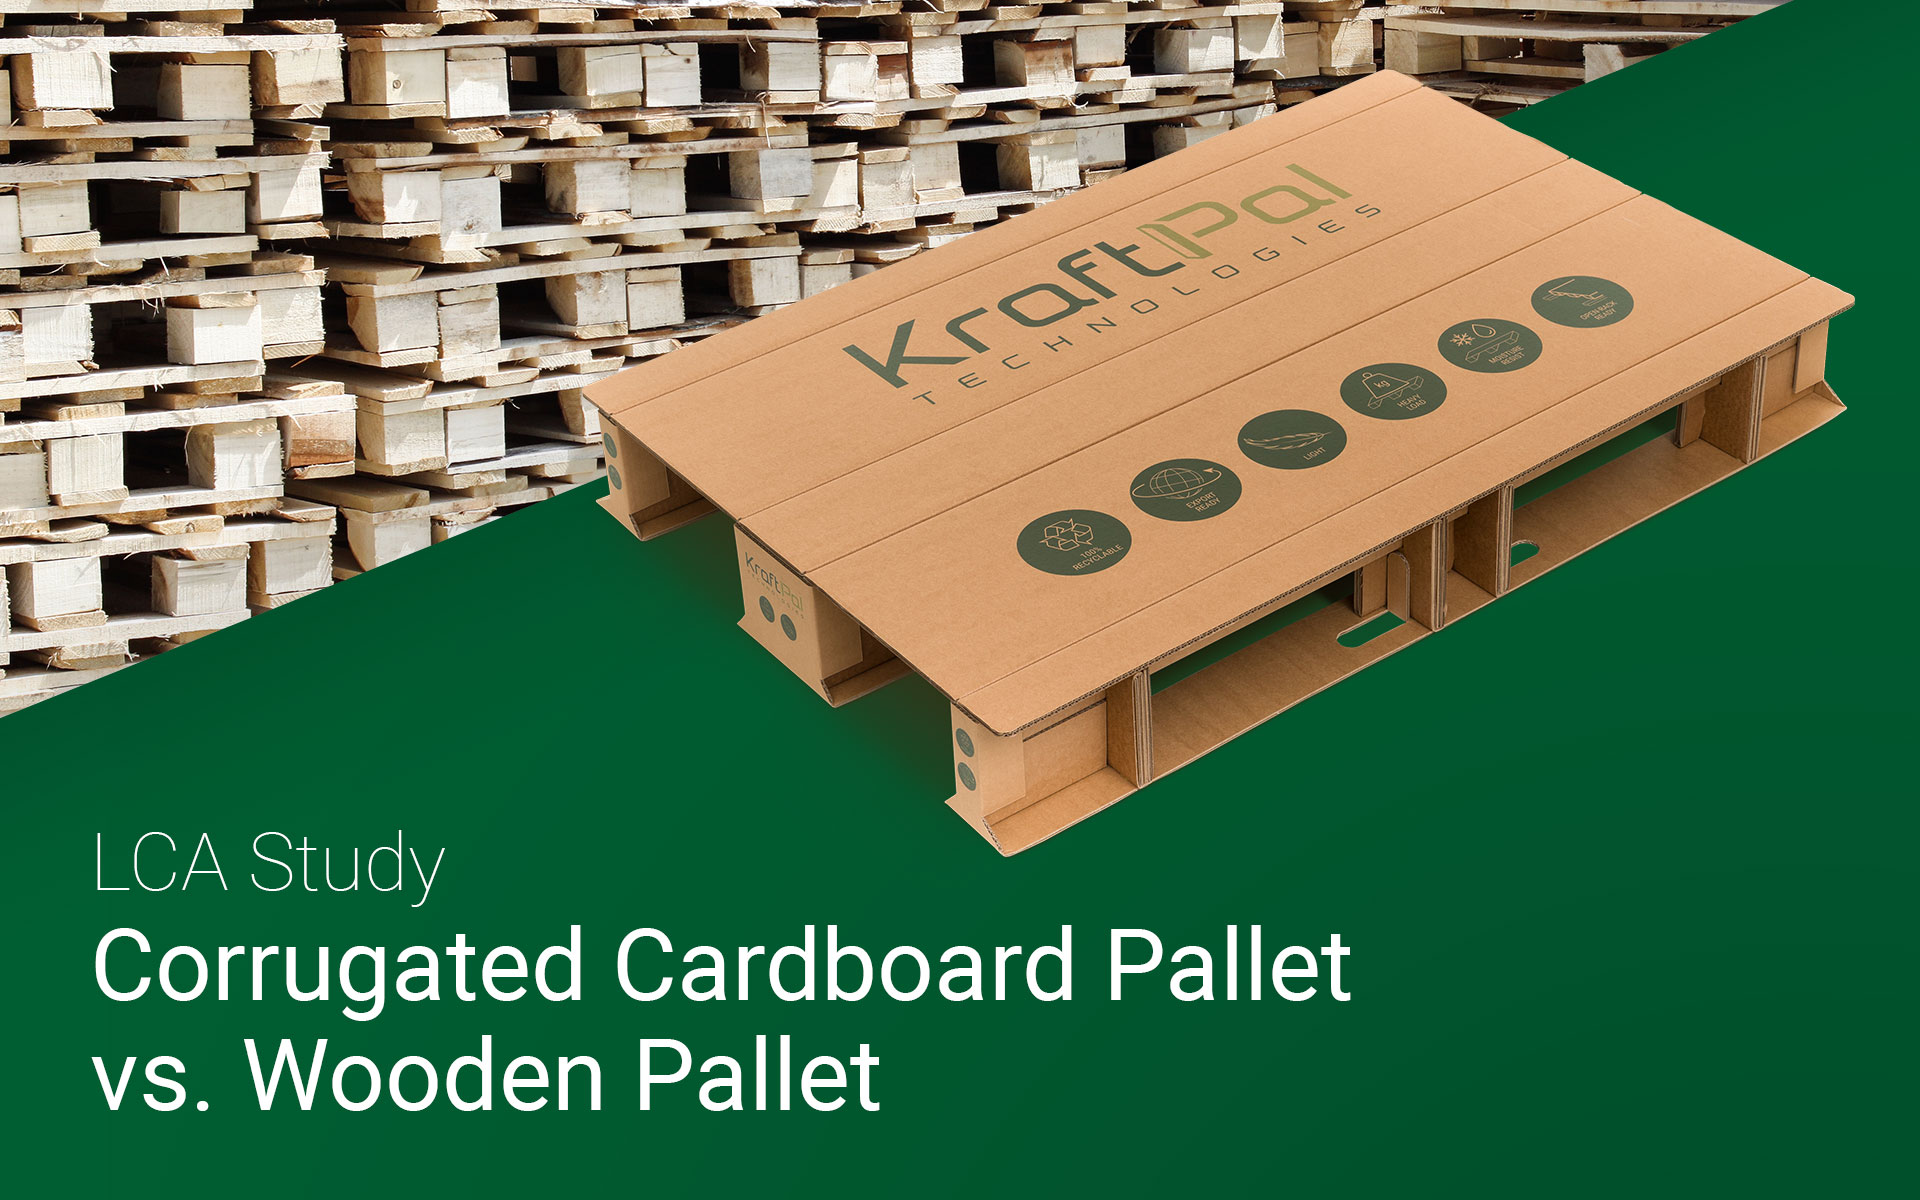 LCA Study finds Corrugated Cardboard Pallets as the most ‘nature-friendly’ standardized loading platform